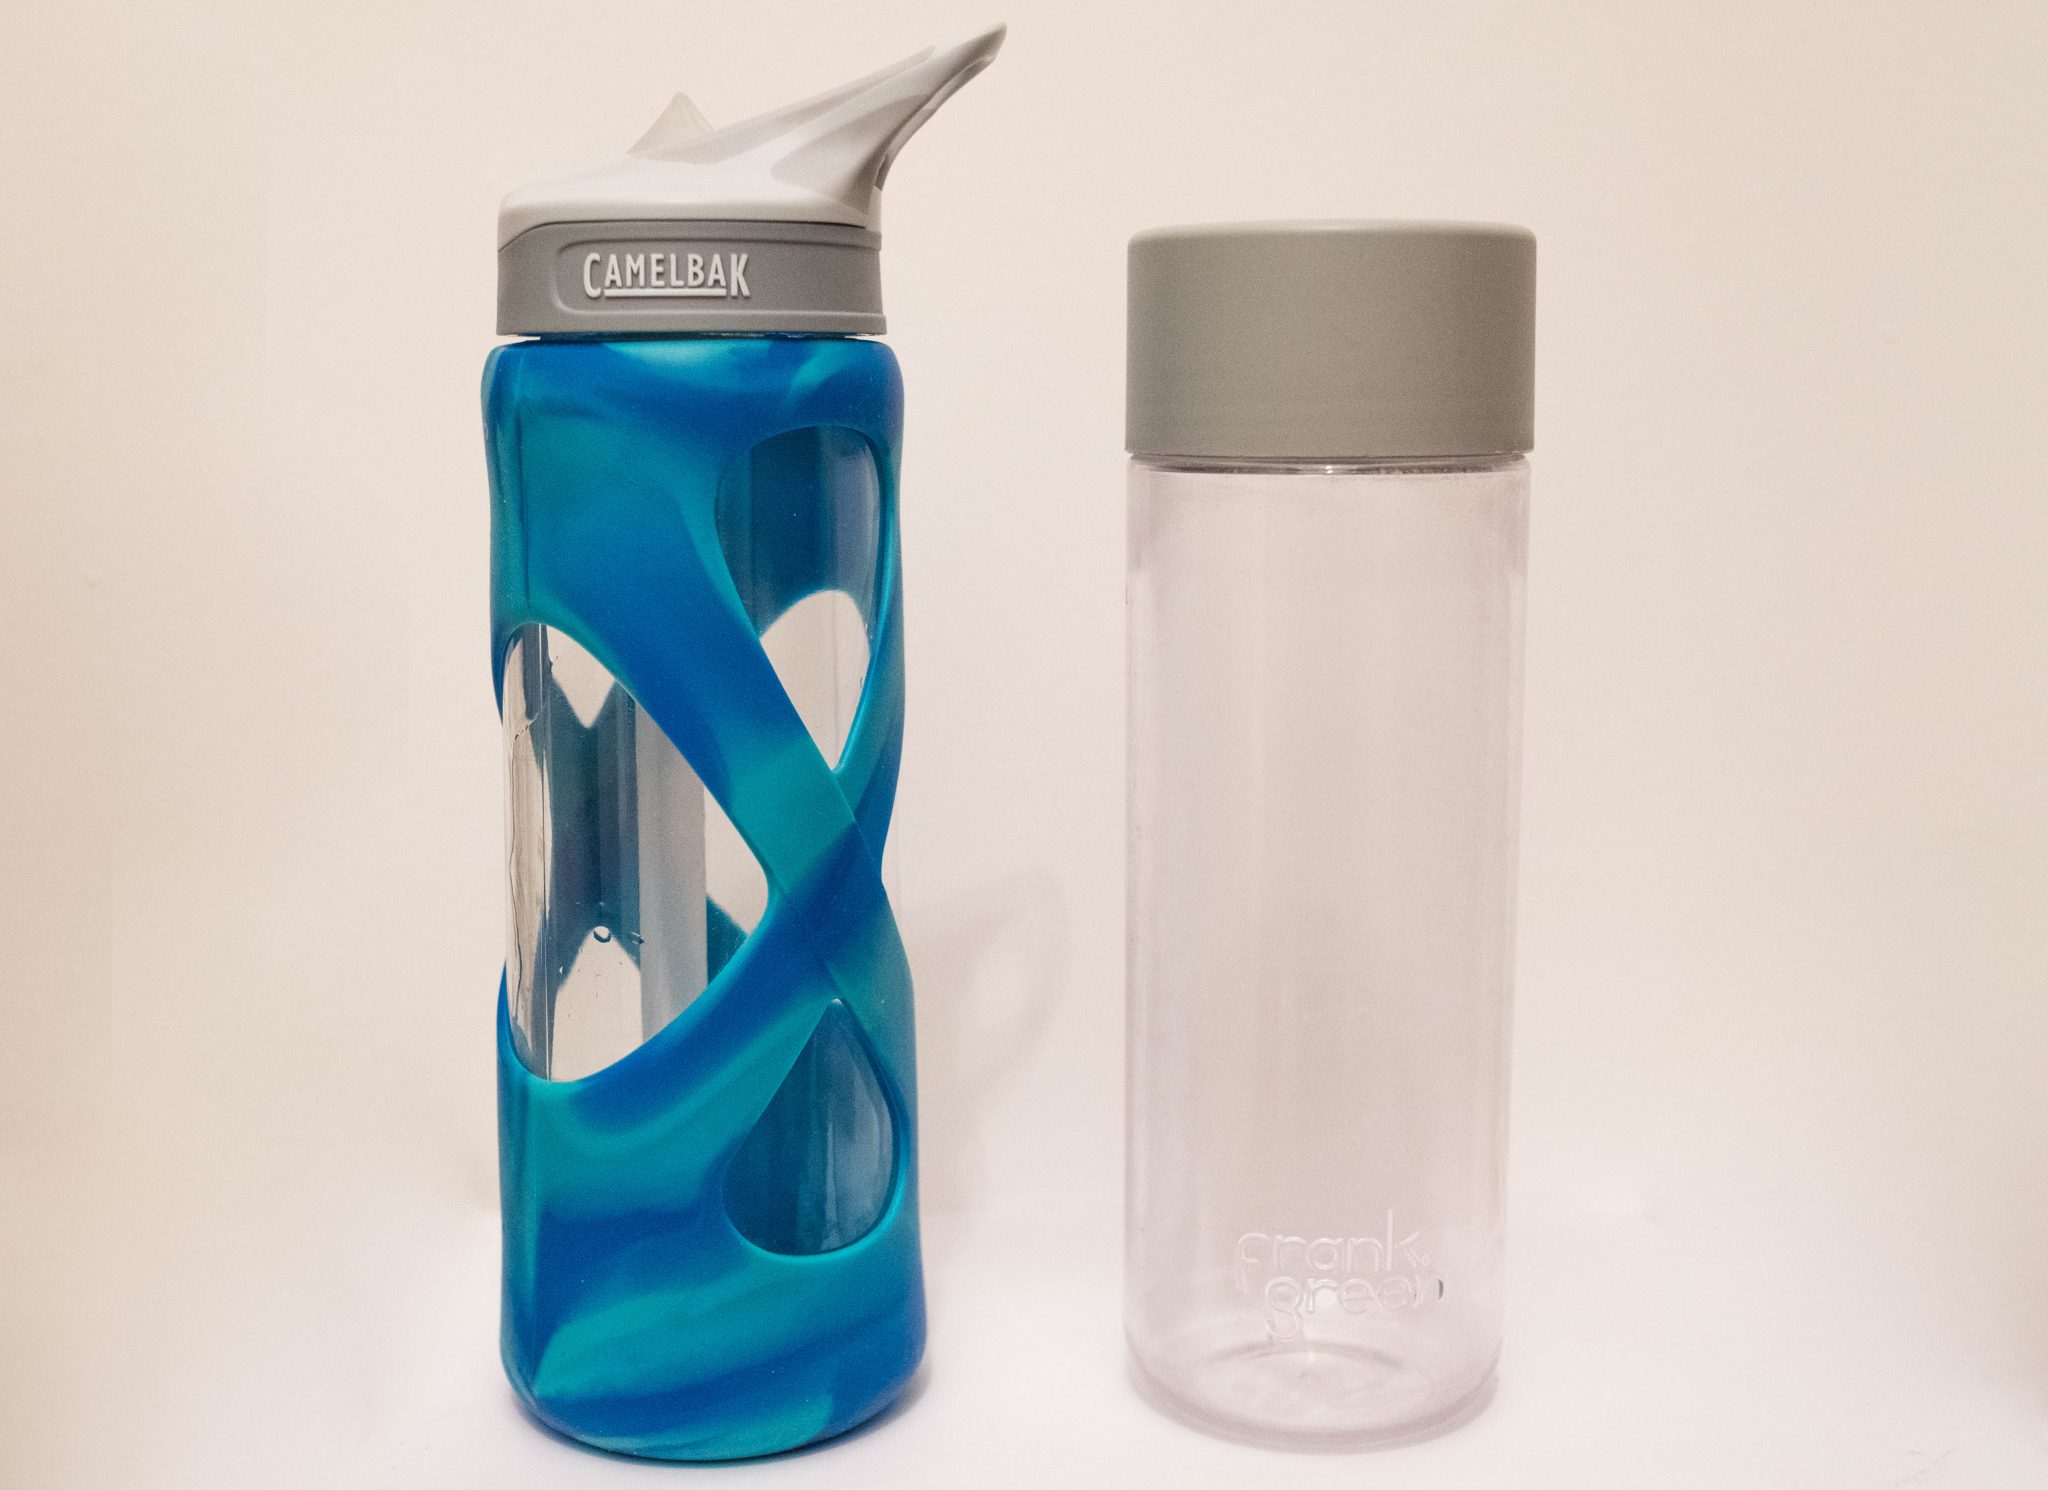 Frank Green Drink Bottle Review - Is It Worth the Money?